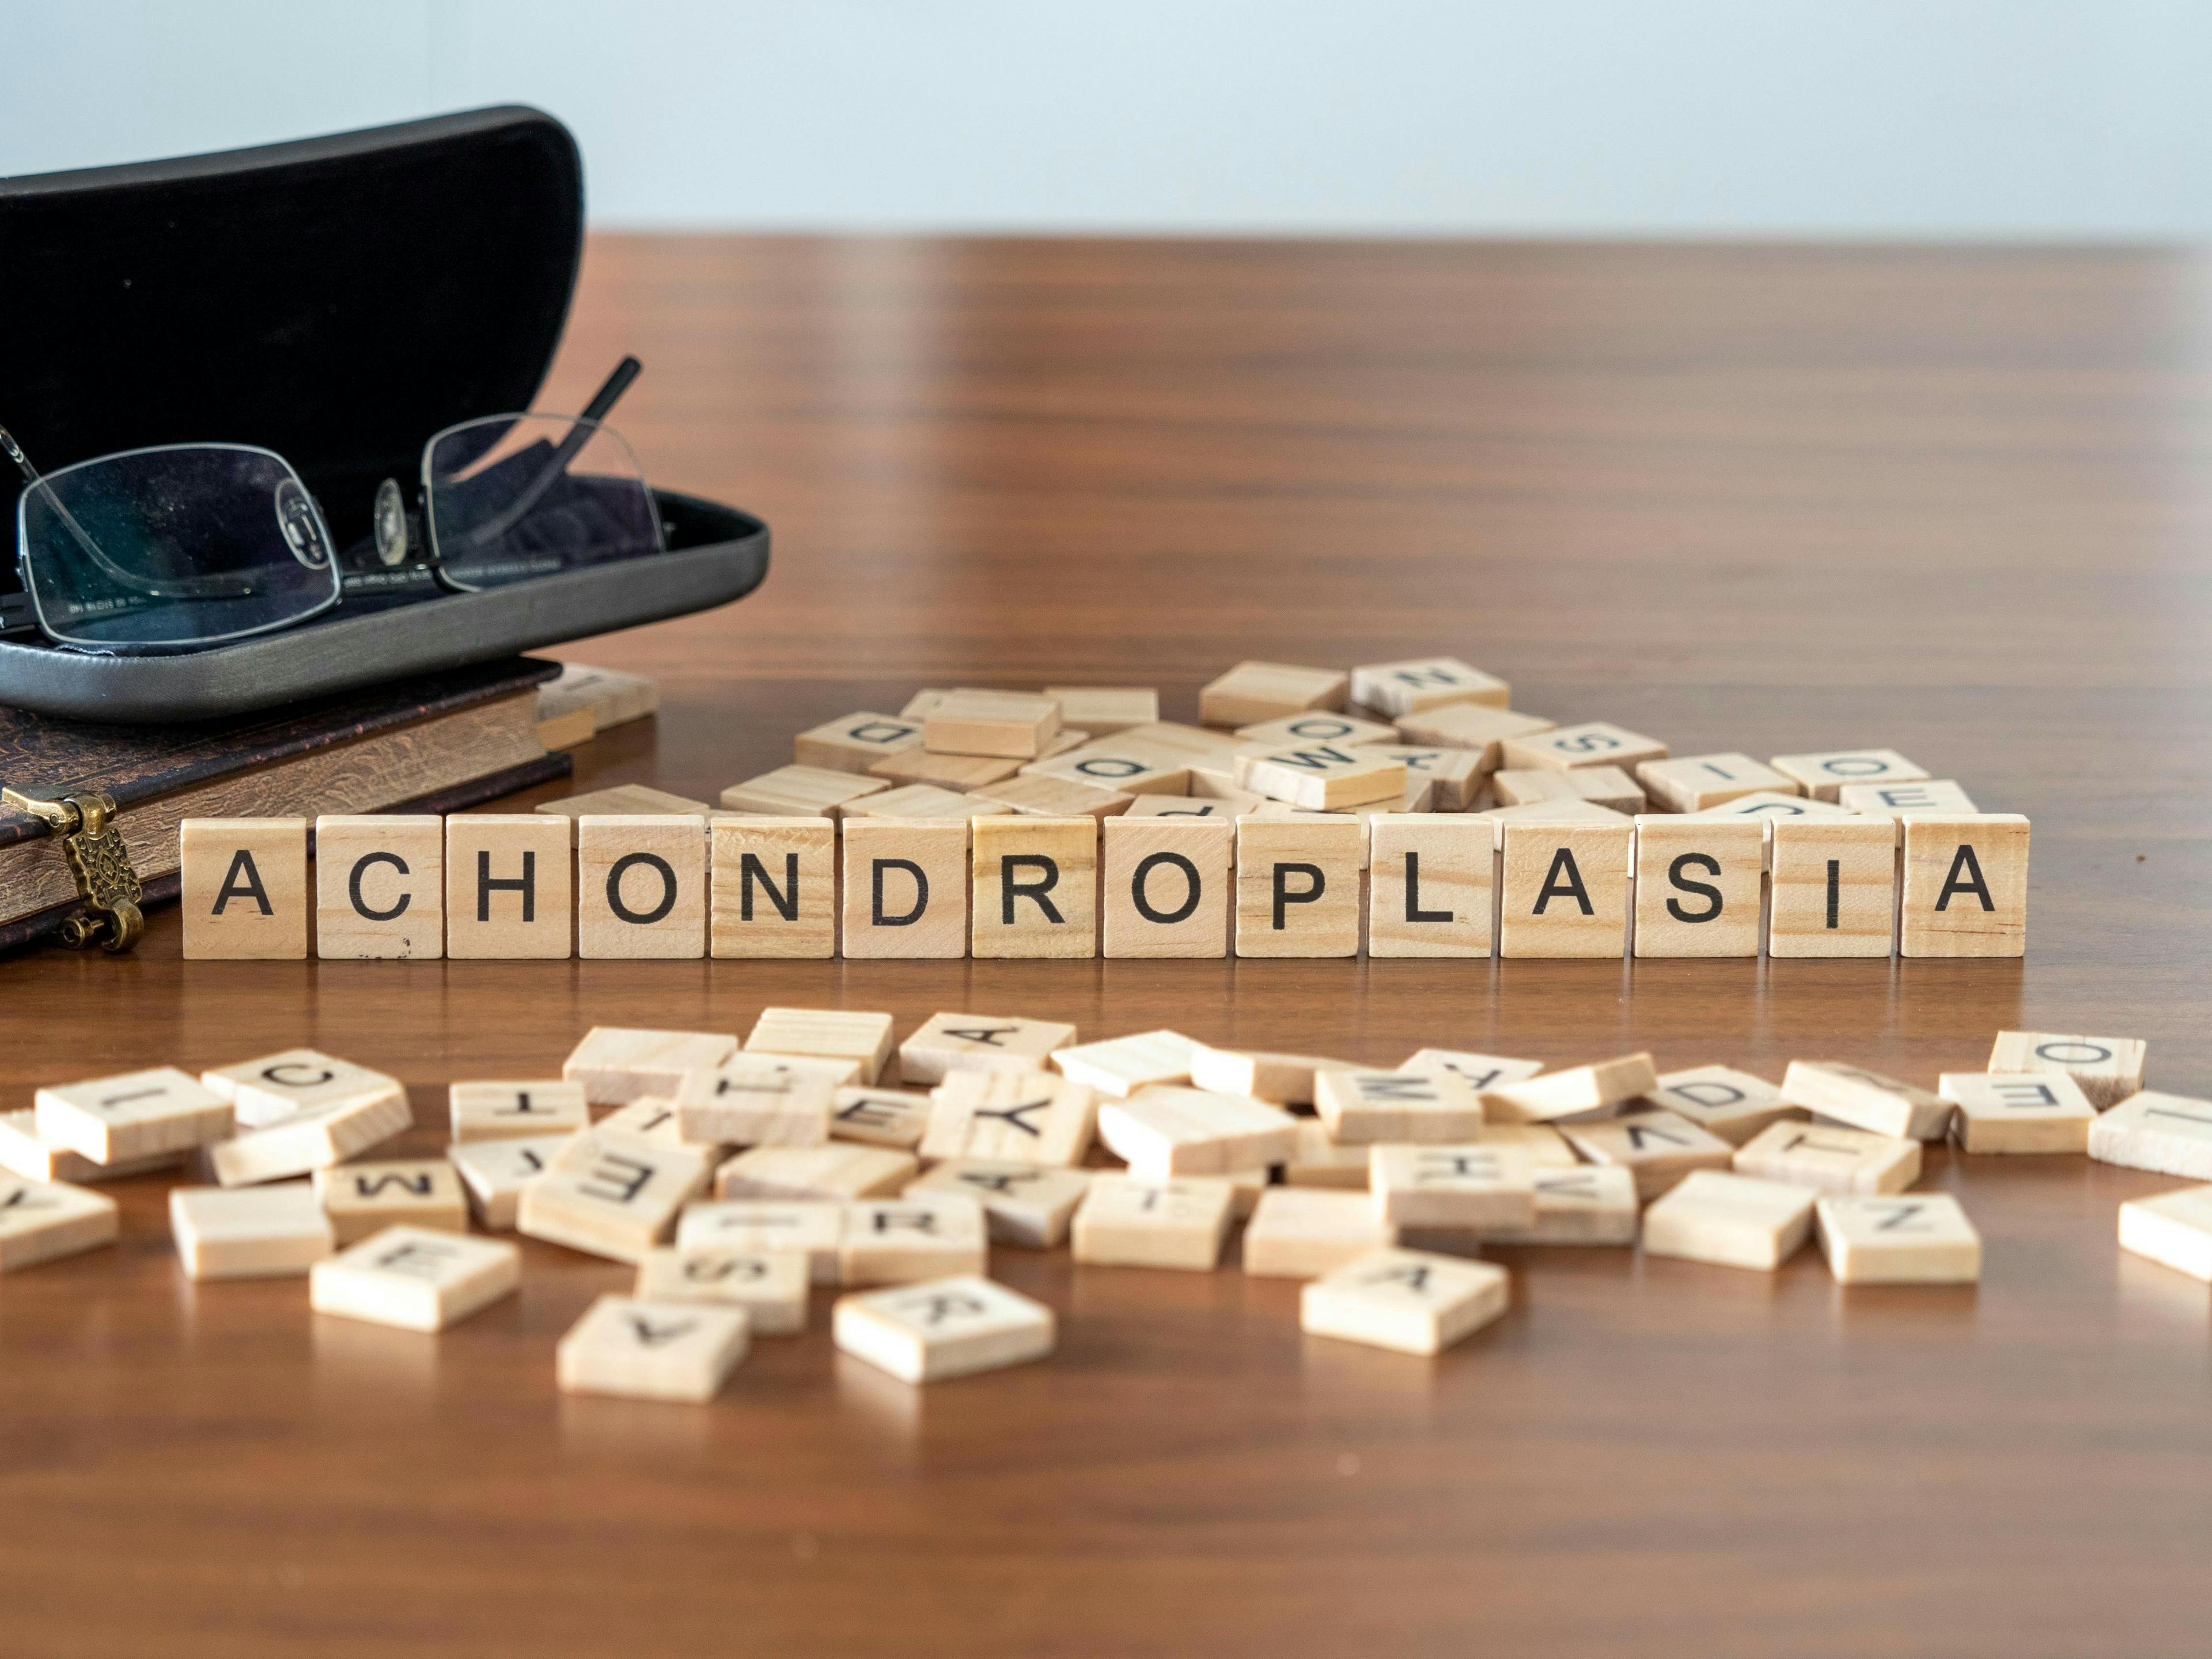 achondroplasia word or concept represented by wooden letter tiles on a wooden table with glasses and a book | lexiconimages - stock.adobe.com 